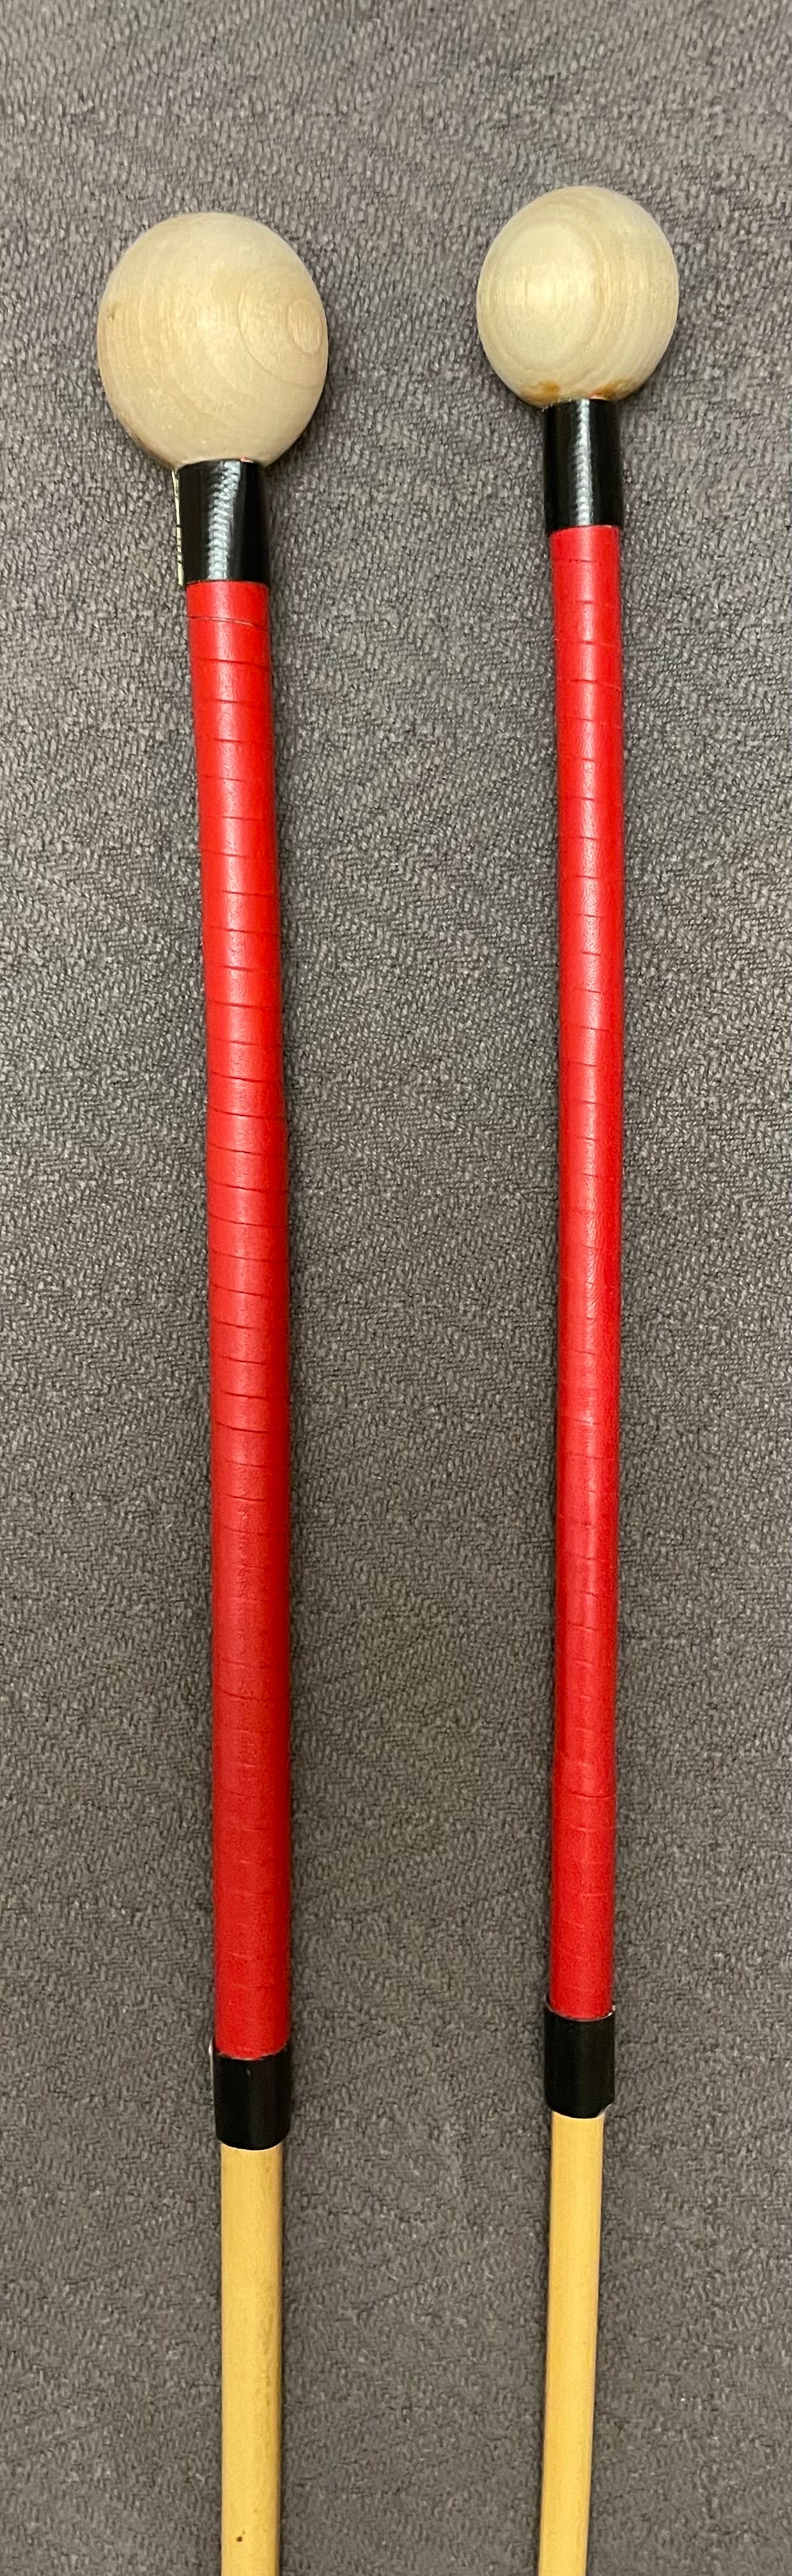 Equestrian Trainer Classic Dragon Rattan Cane Pair with Red Kangaroo Leather Handles - 95 to 105 cms Length